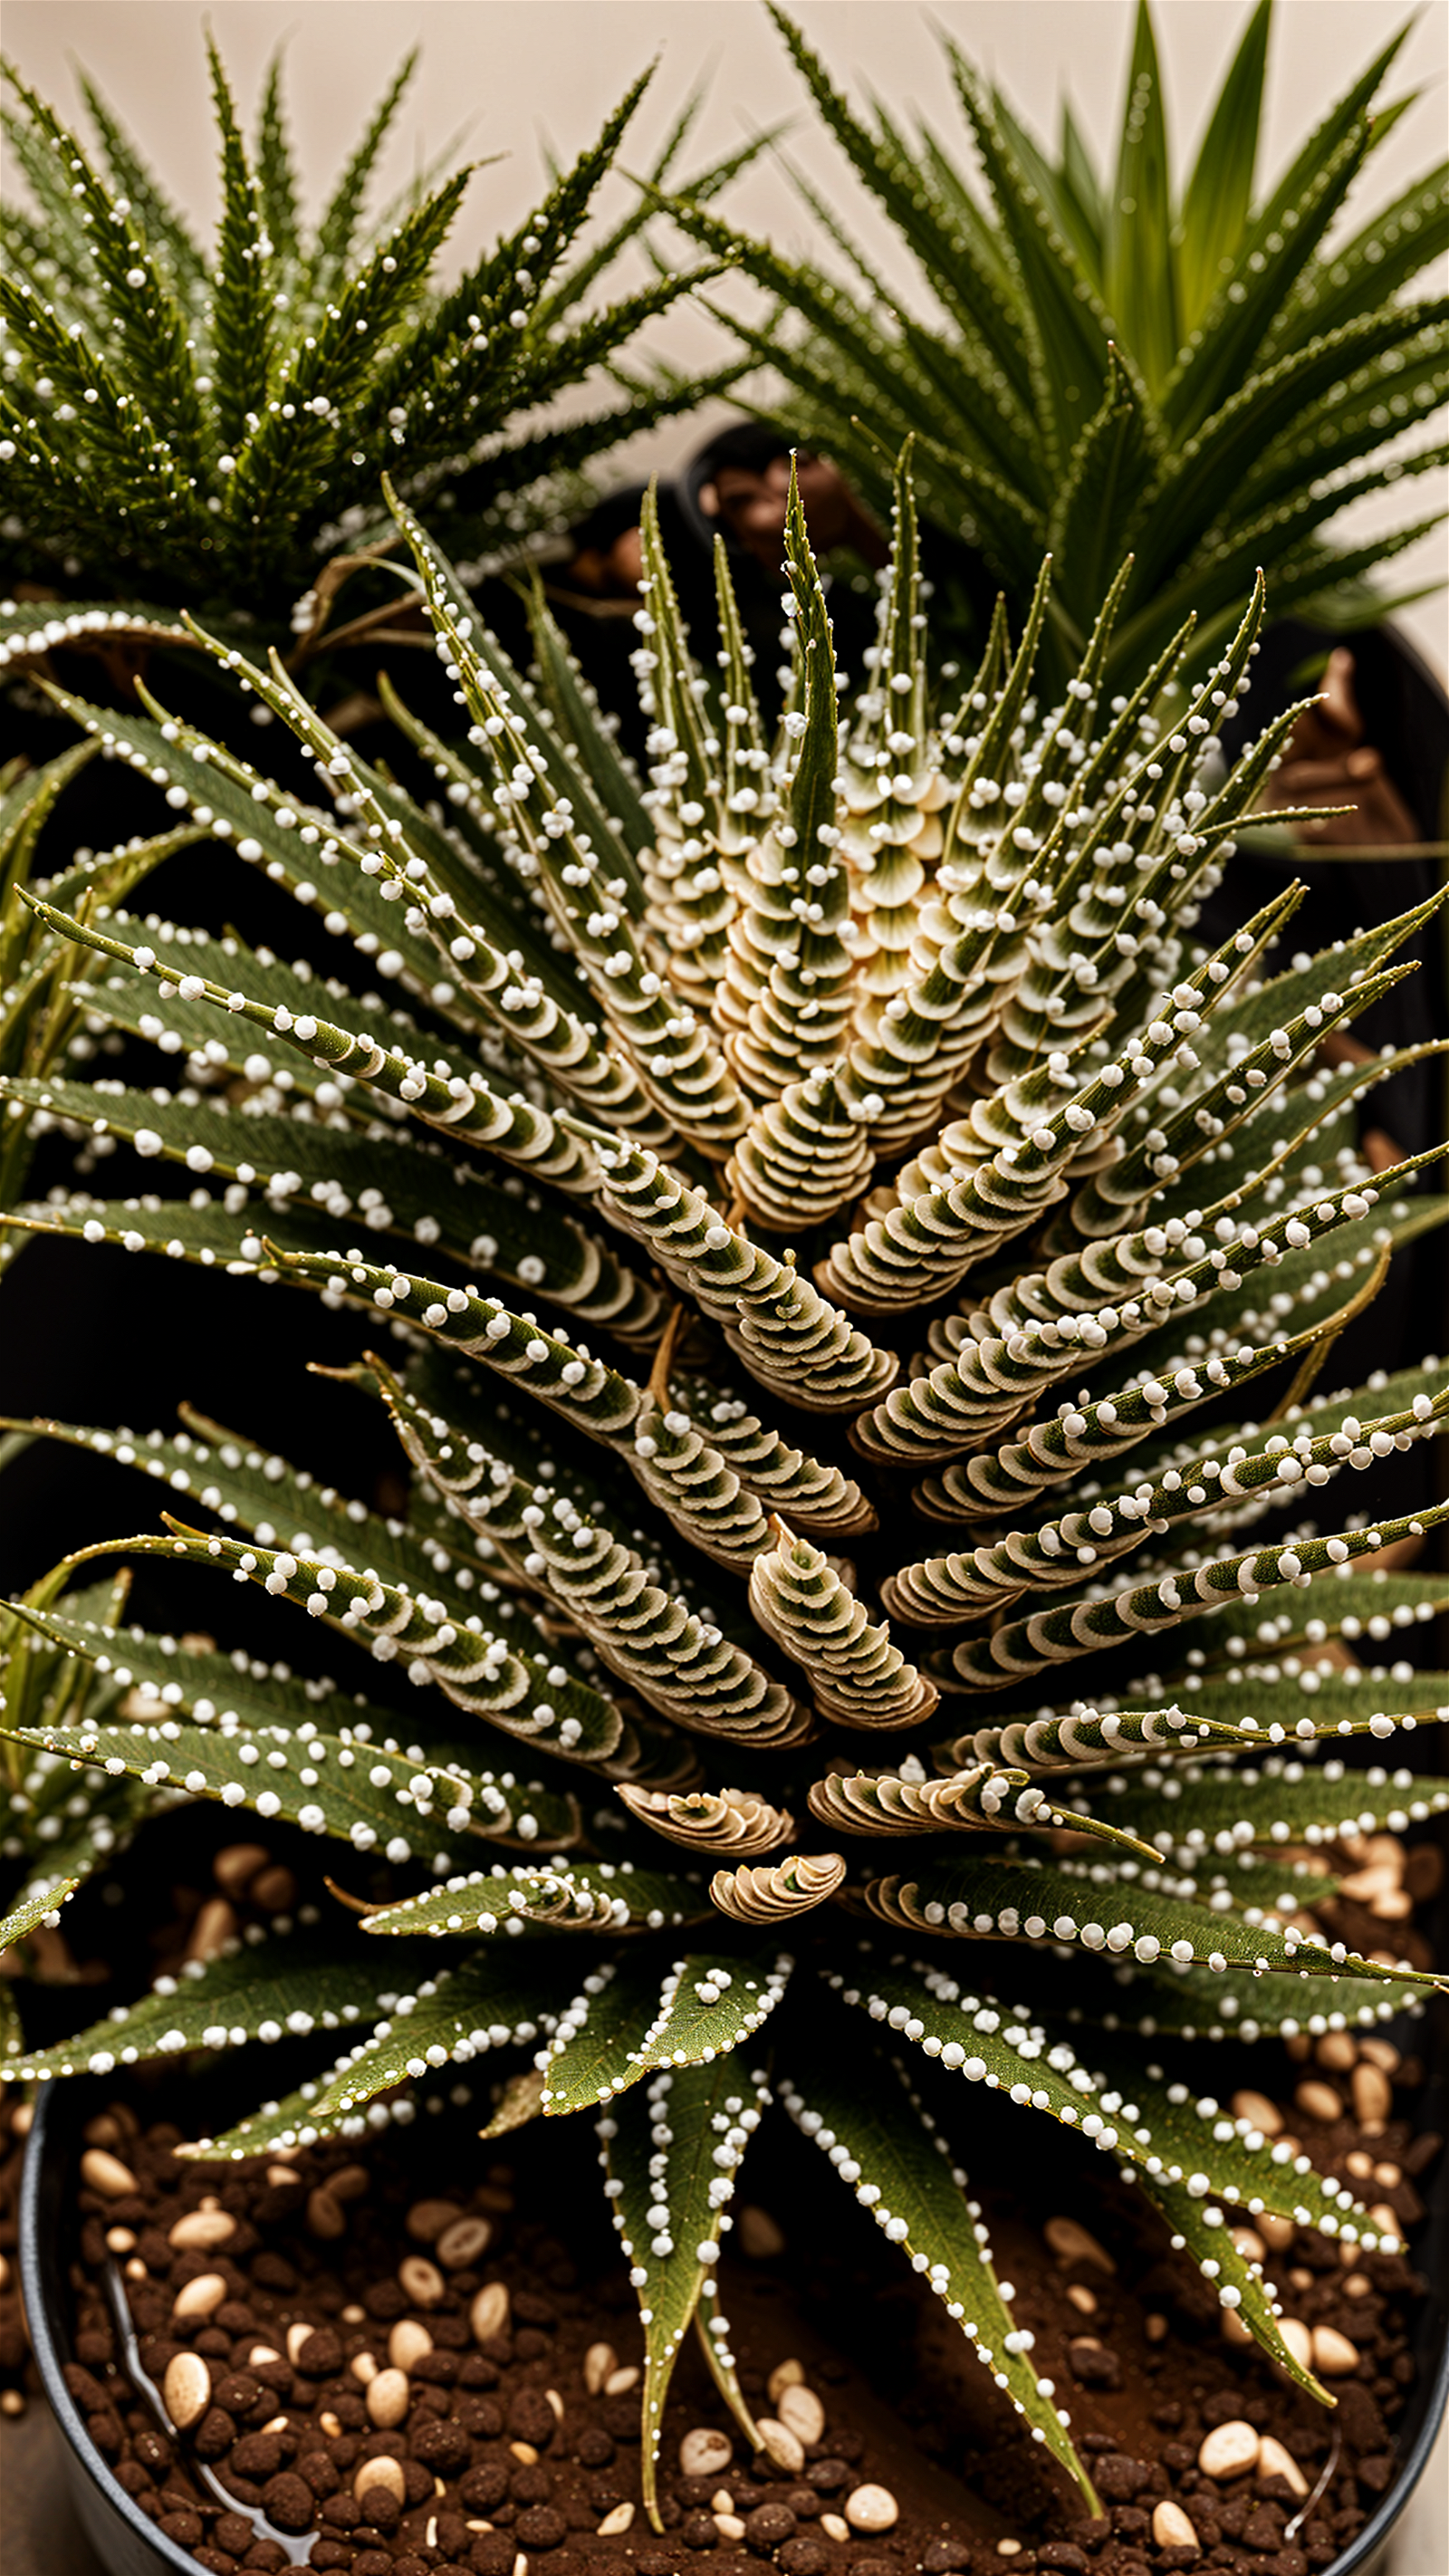 Haworthiopsis fasciata plant in a planter, detailed leaves, indoor décor, under clear lighting.